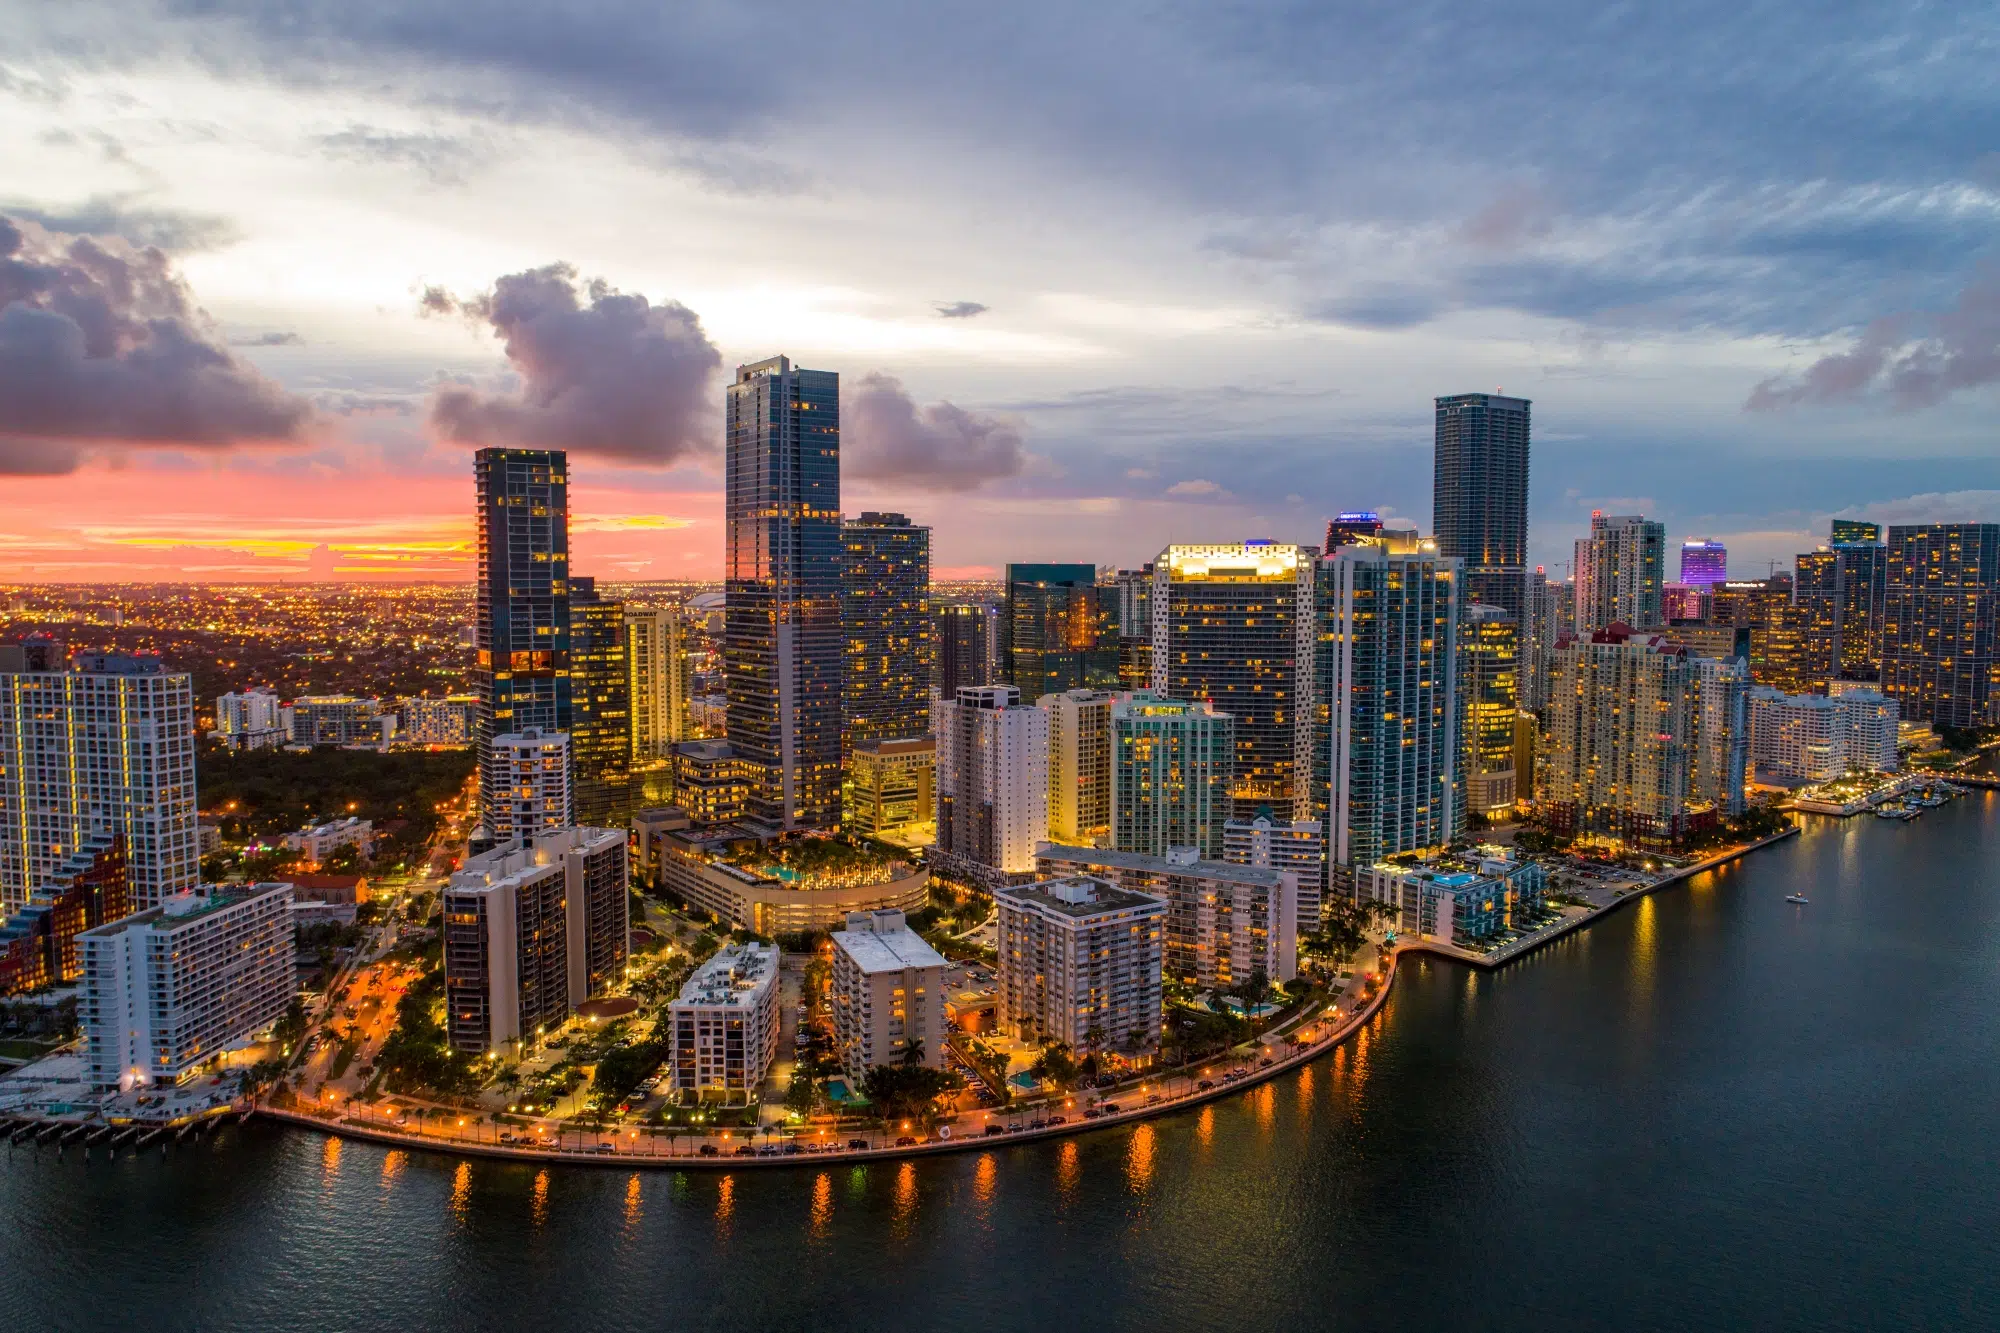 Miami - Beaches, Glamour, and Nightlife